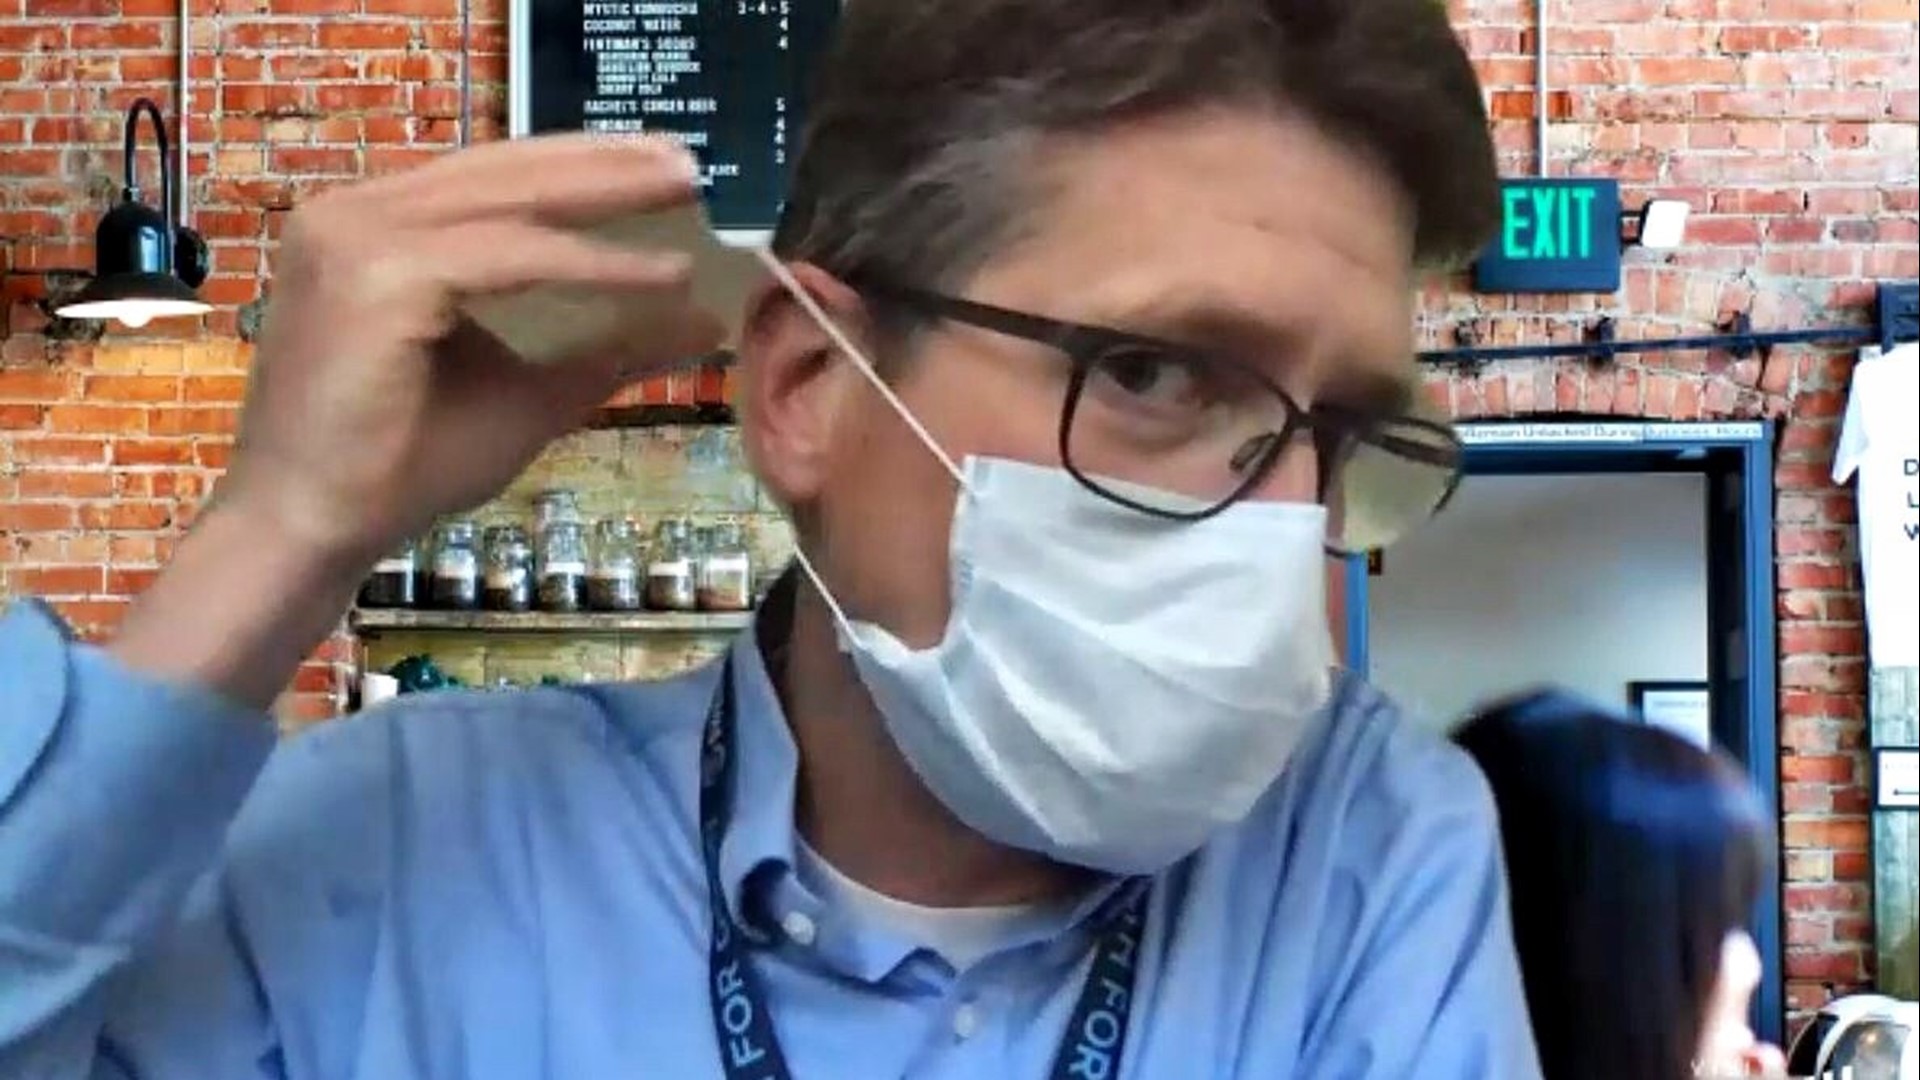 Dr. Chris Dale explains some dos and don'ts for wearing a mask. Sponsored by Swedish.